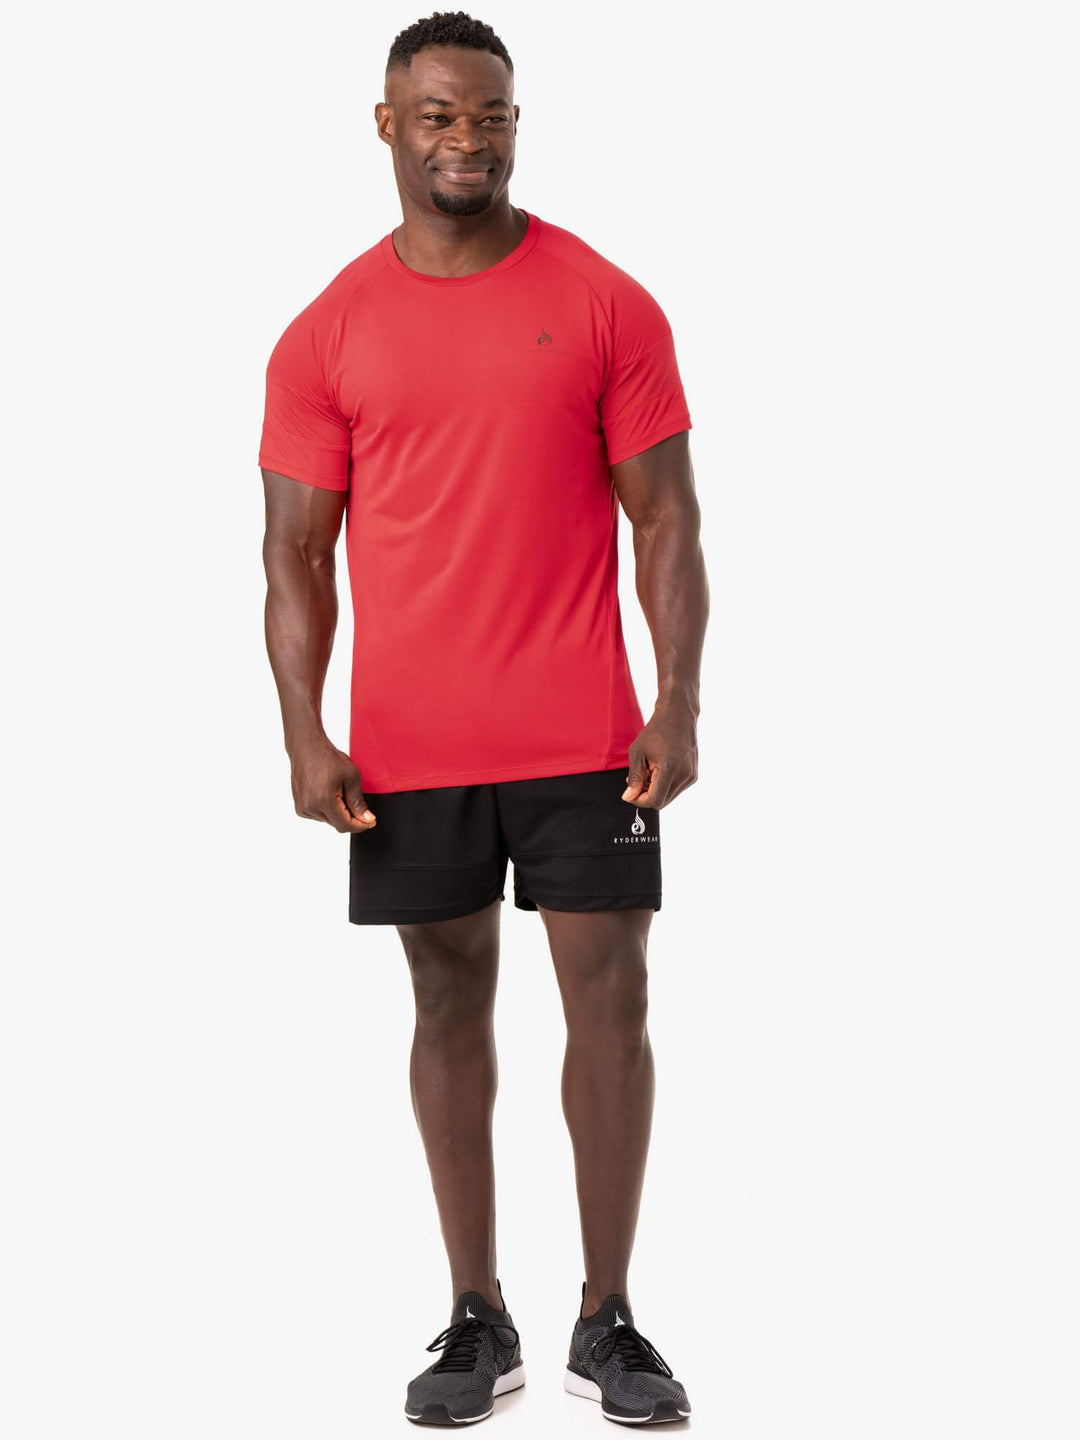 Action Mesh T-Shirt - Red Clothing Ryderwear 